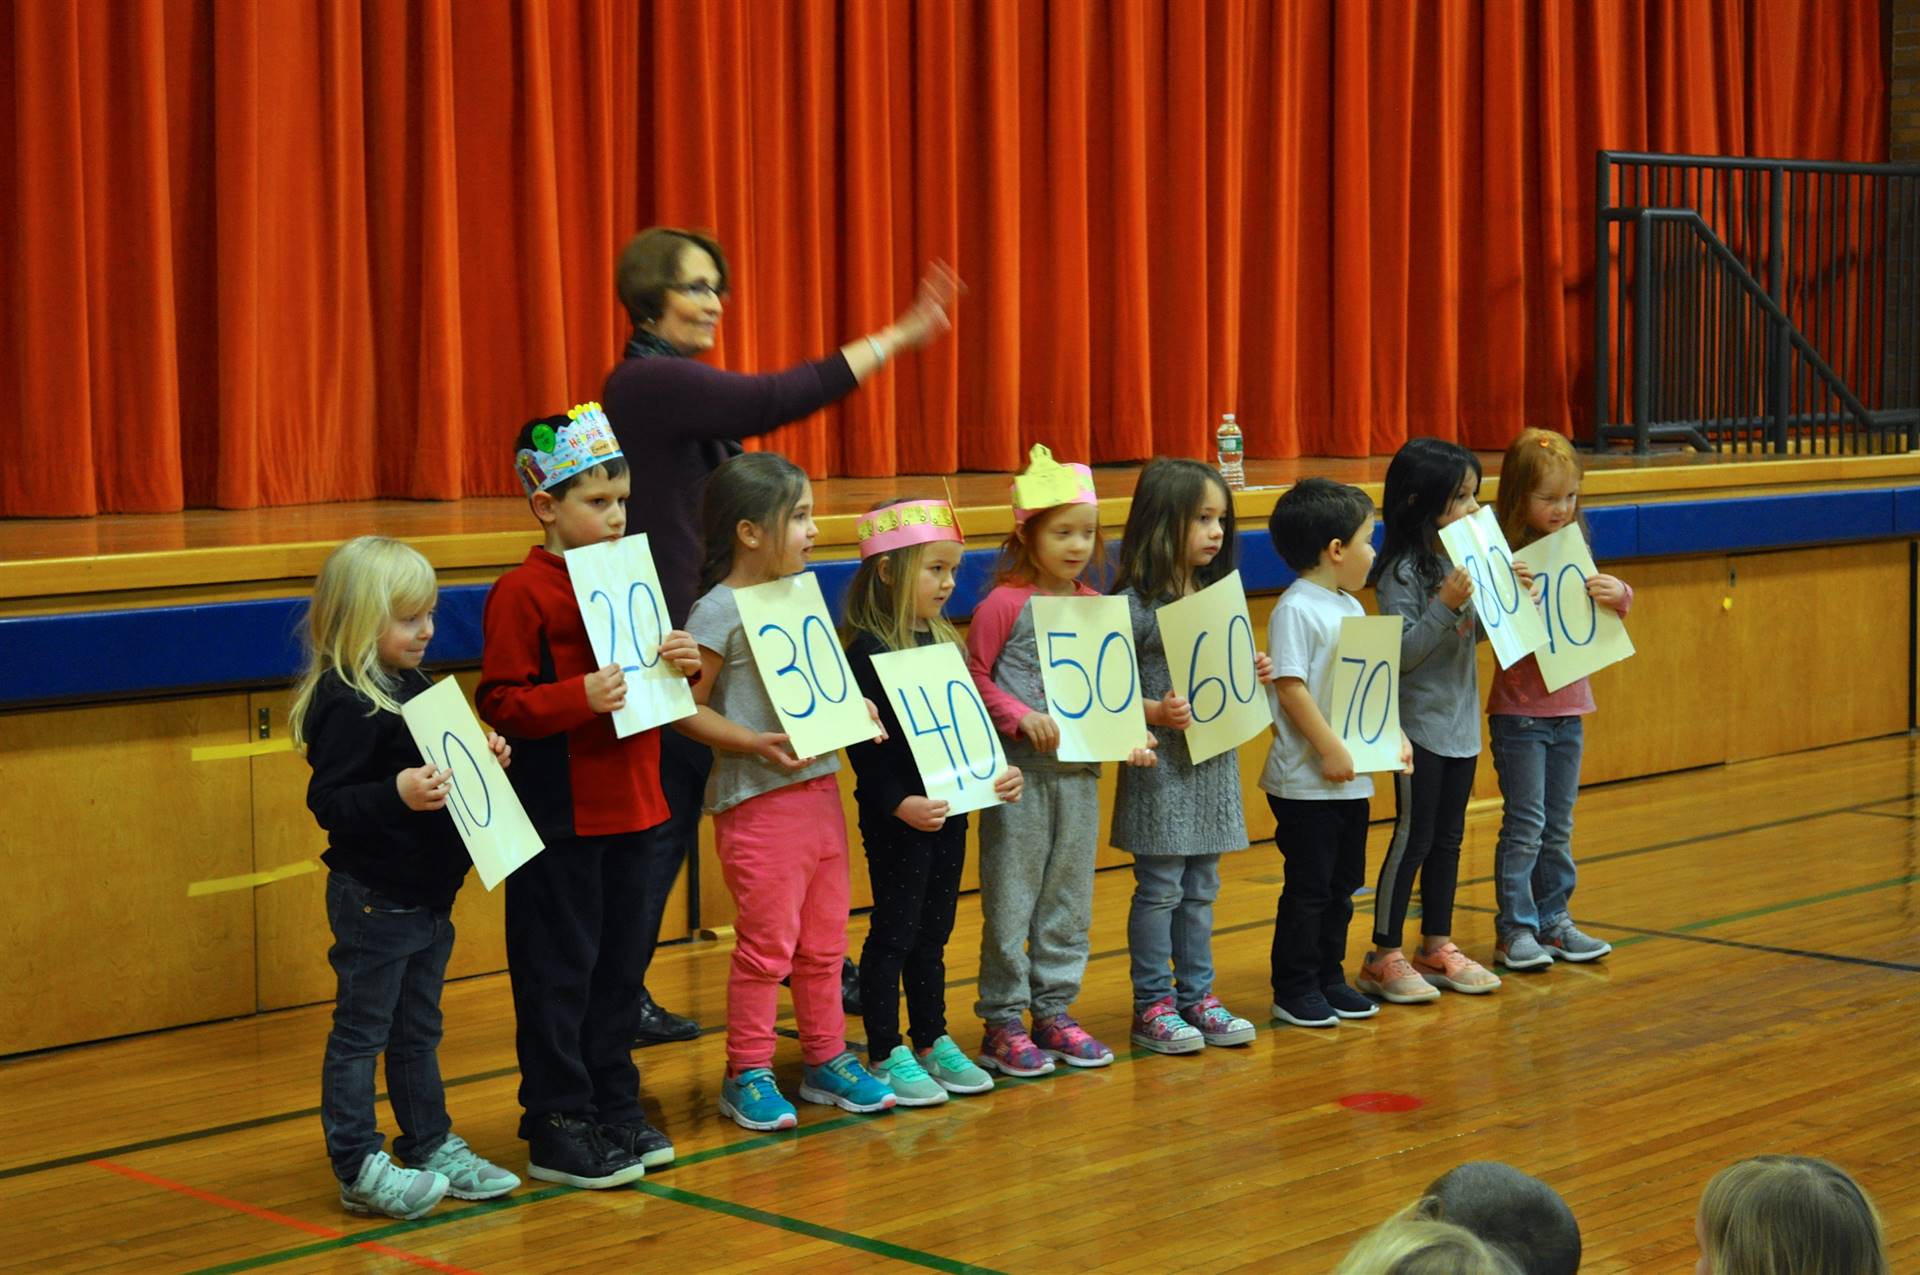 Teacher and students holding signs counting to 100 by 10's.